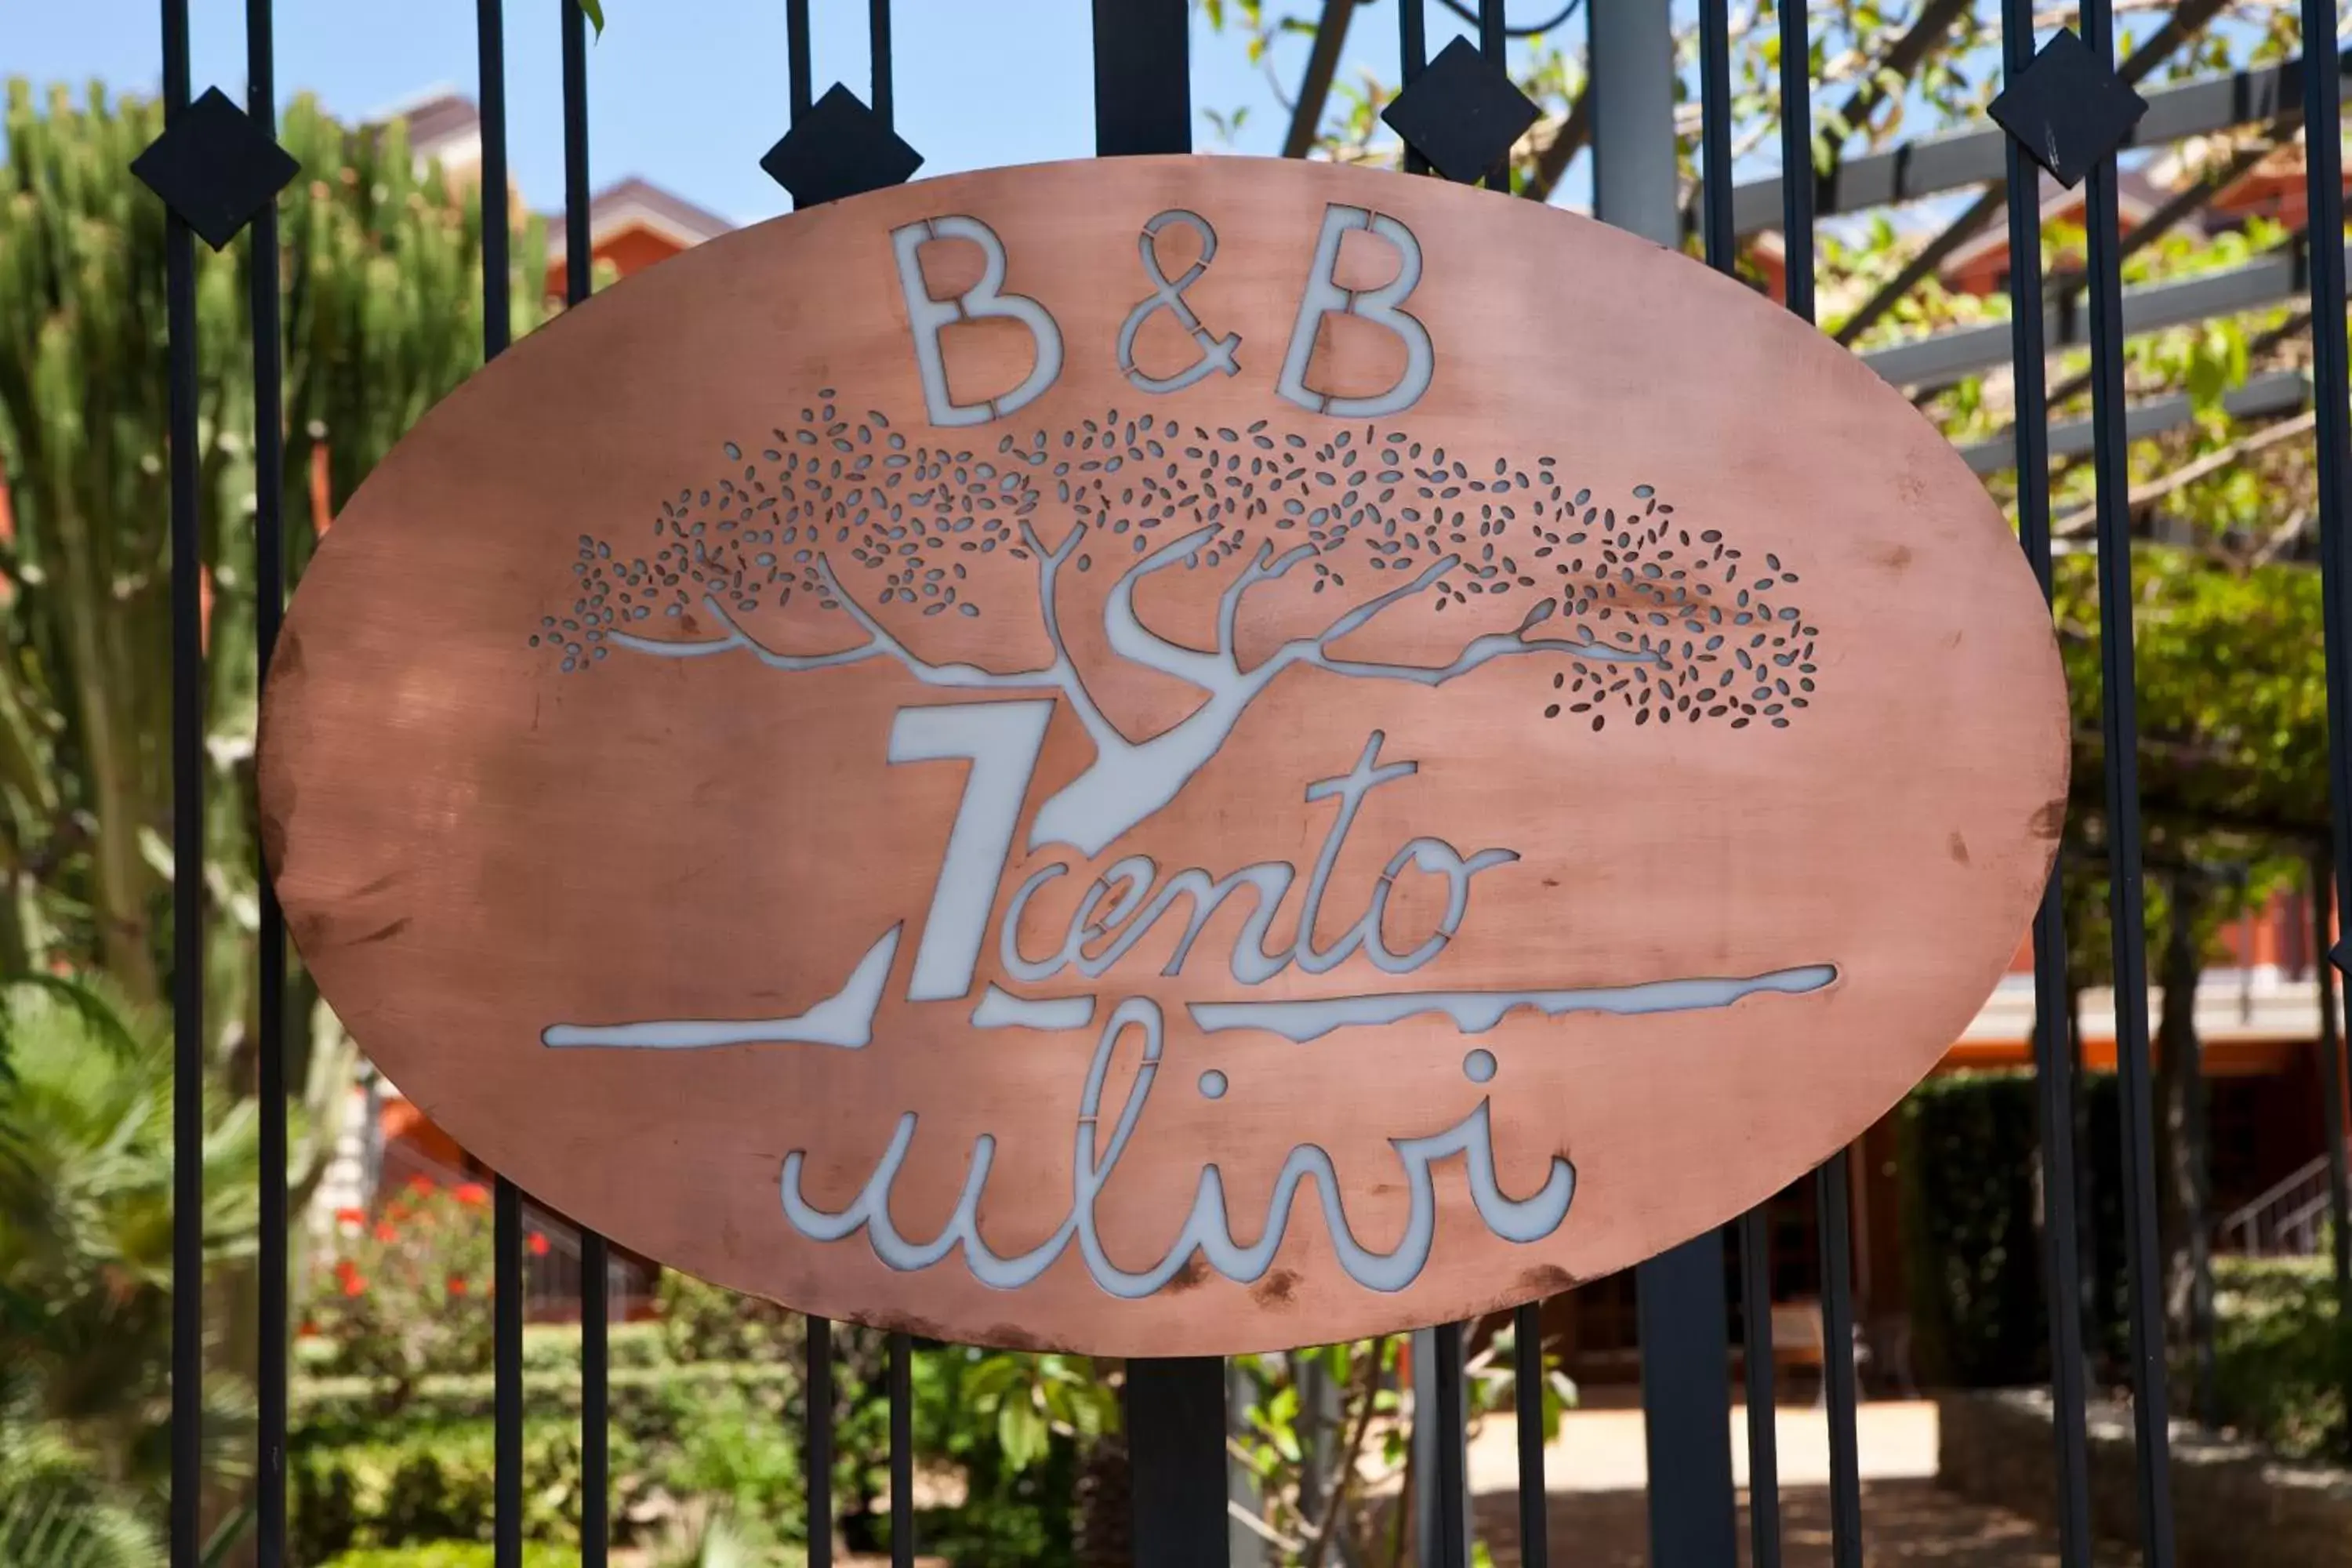 Property logo or sign in B&B 7Cento Ulivi